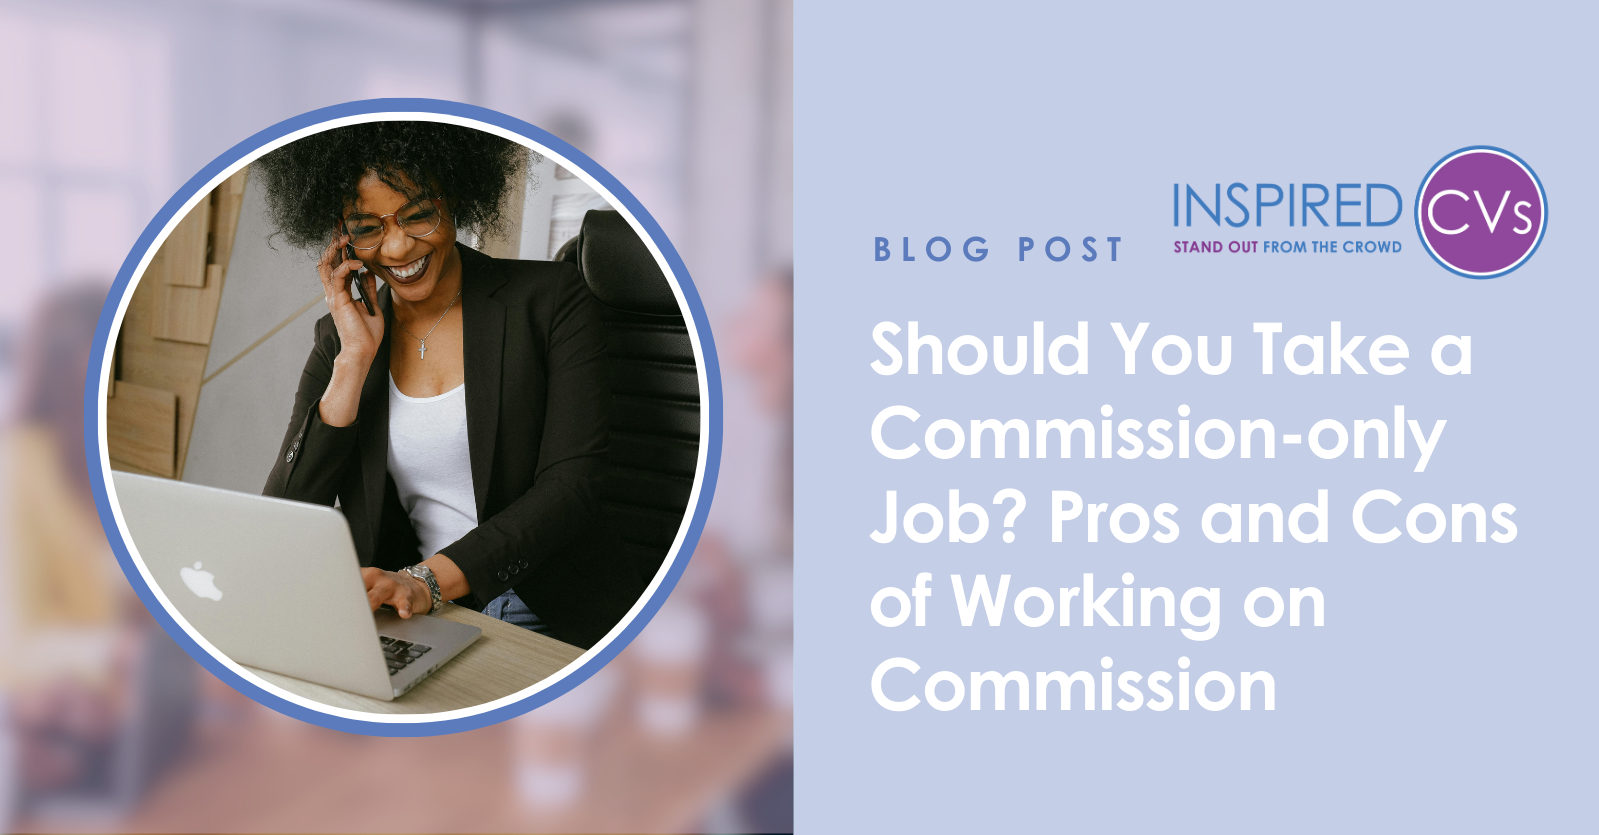 Should You Take a Commission-Only Job? The Pros and Cons of Working on Commission